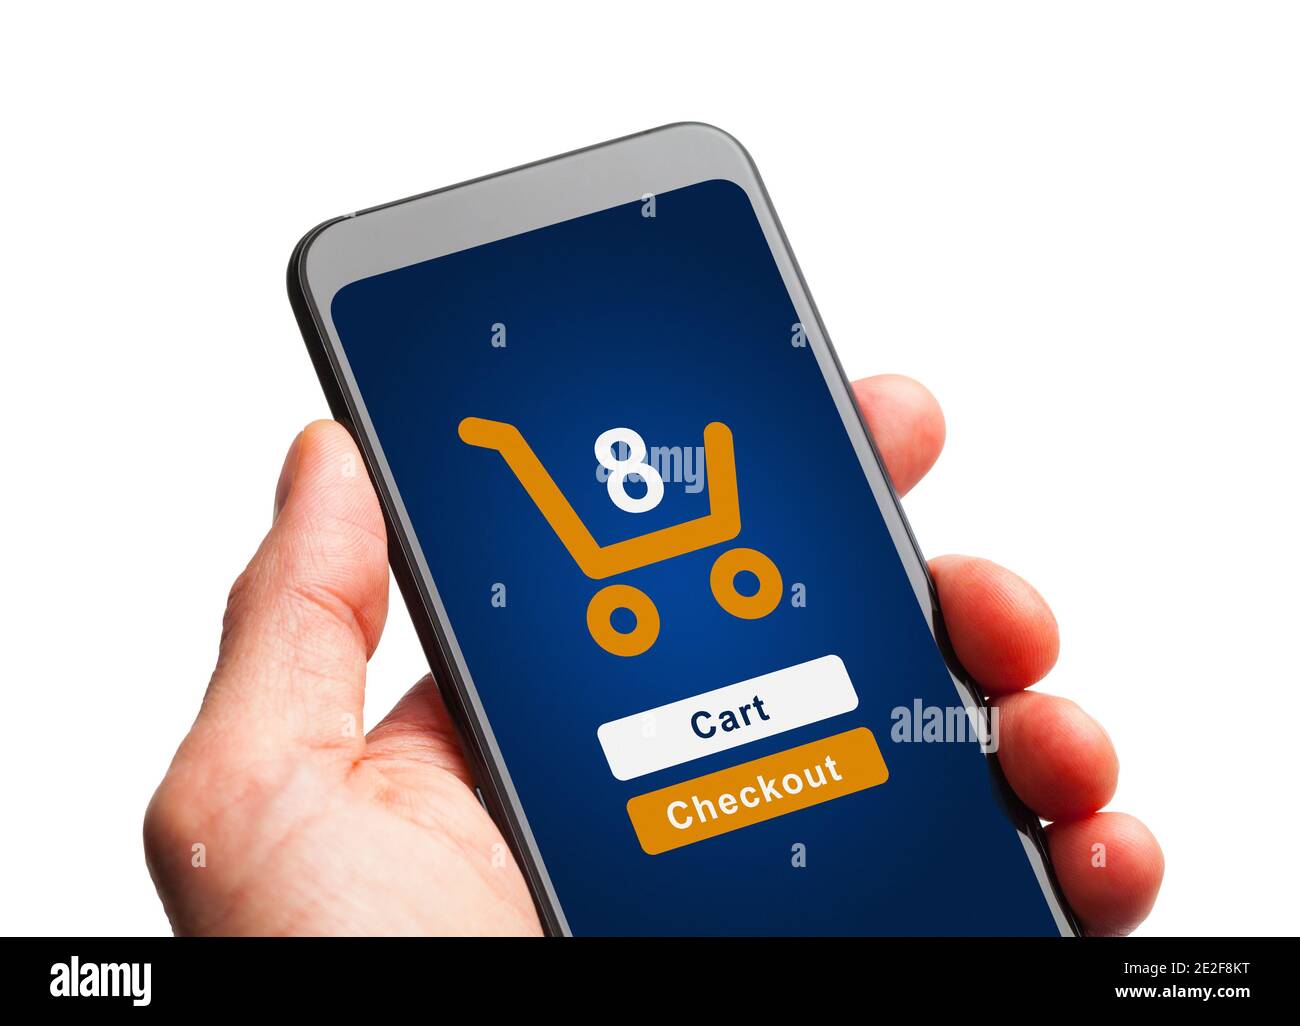 Hand Holding Smart Phone with Shopping Cart Checkout and Items in Basket. Stock Photo